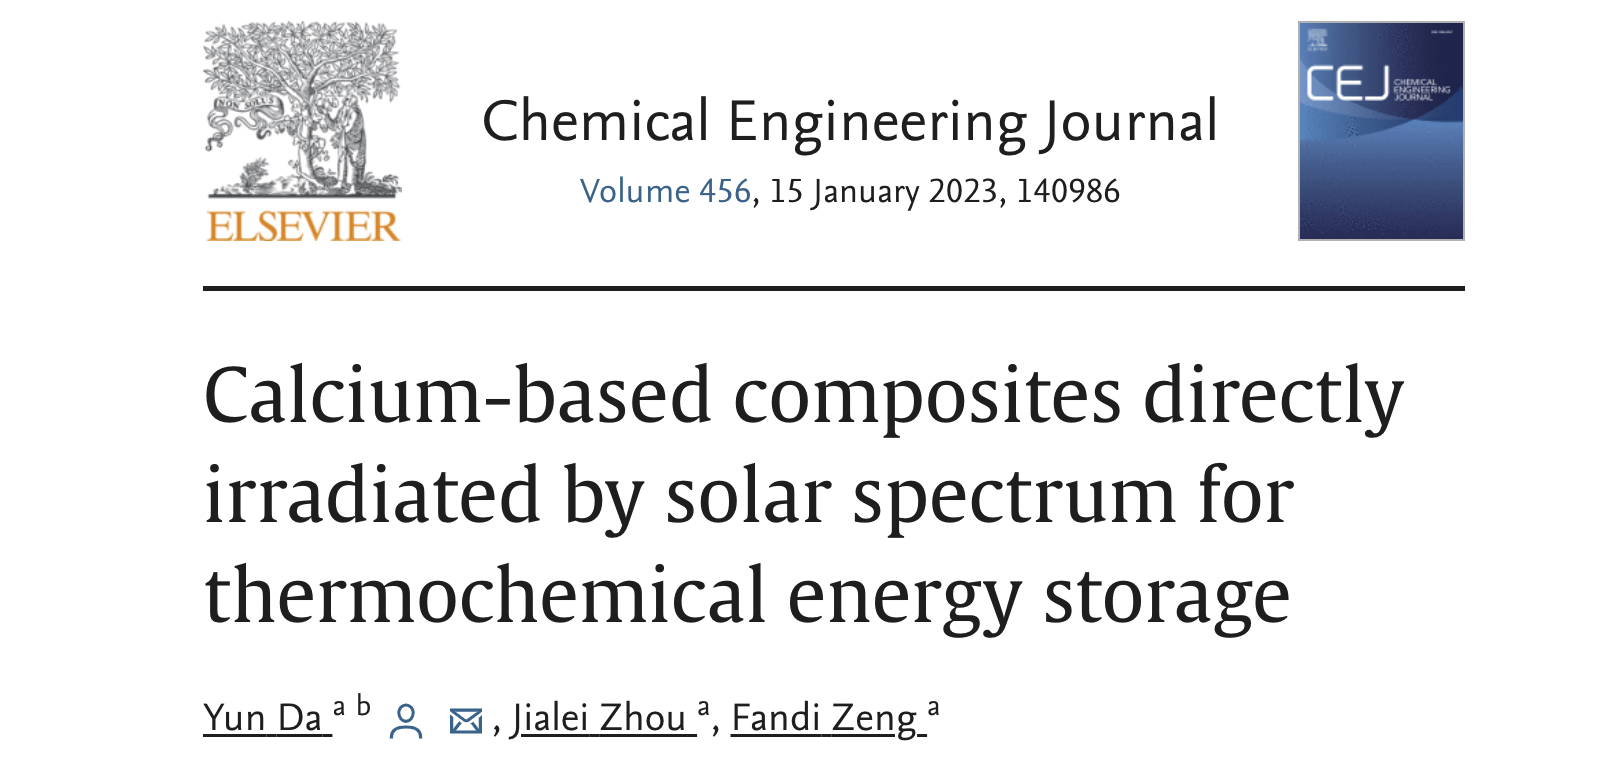 Published at Chemical Engineering – Calcium-based composites directly irradiated by solar spectrum for thermochemical energy storage